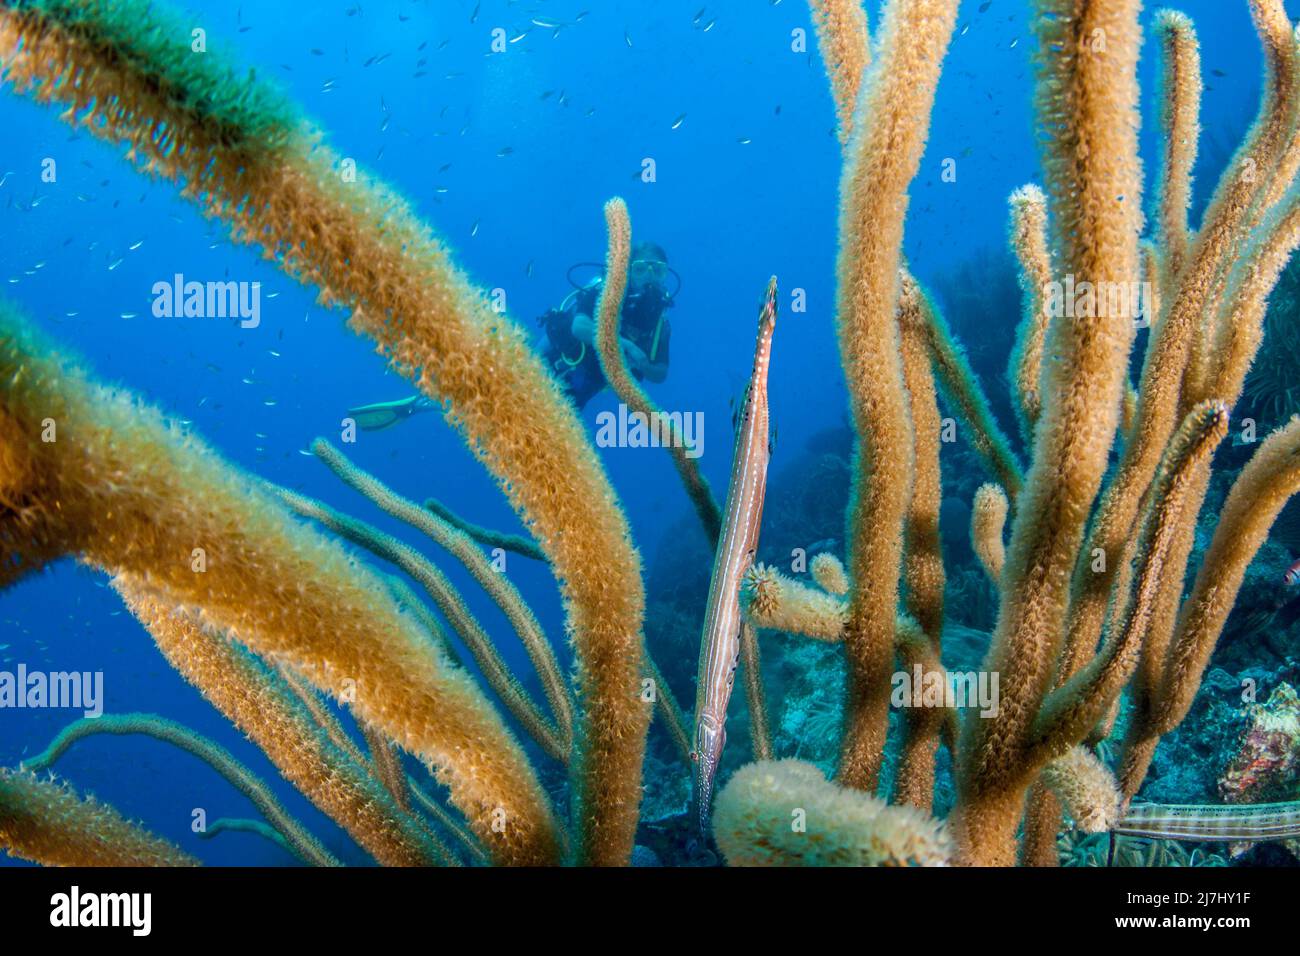 A diver and West Atlantic trumpetfish or Trumpetfish, Aulostomus maculatus, hiding in soft coral, on the Sea Aquarium House Reef off the island of Cur Stock Photo